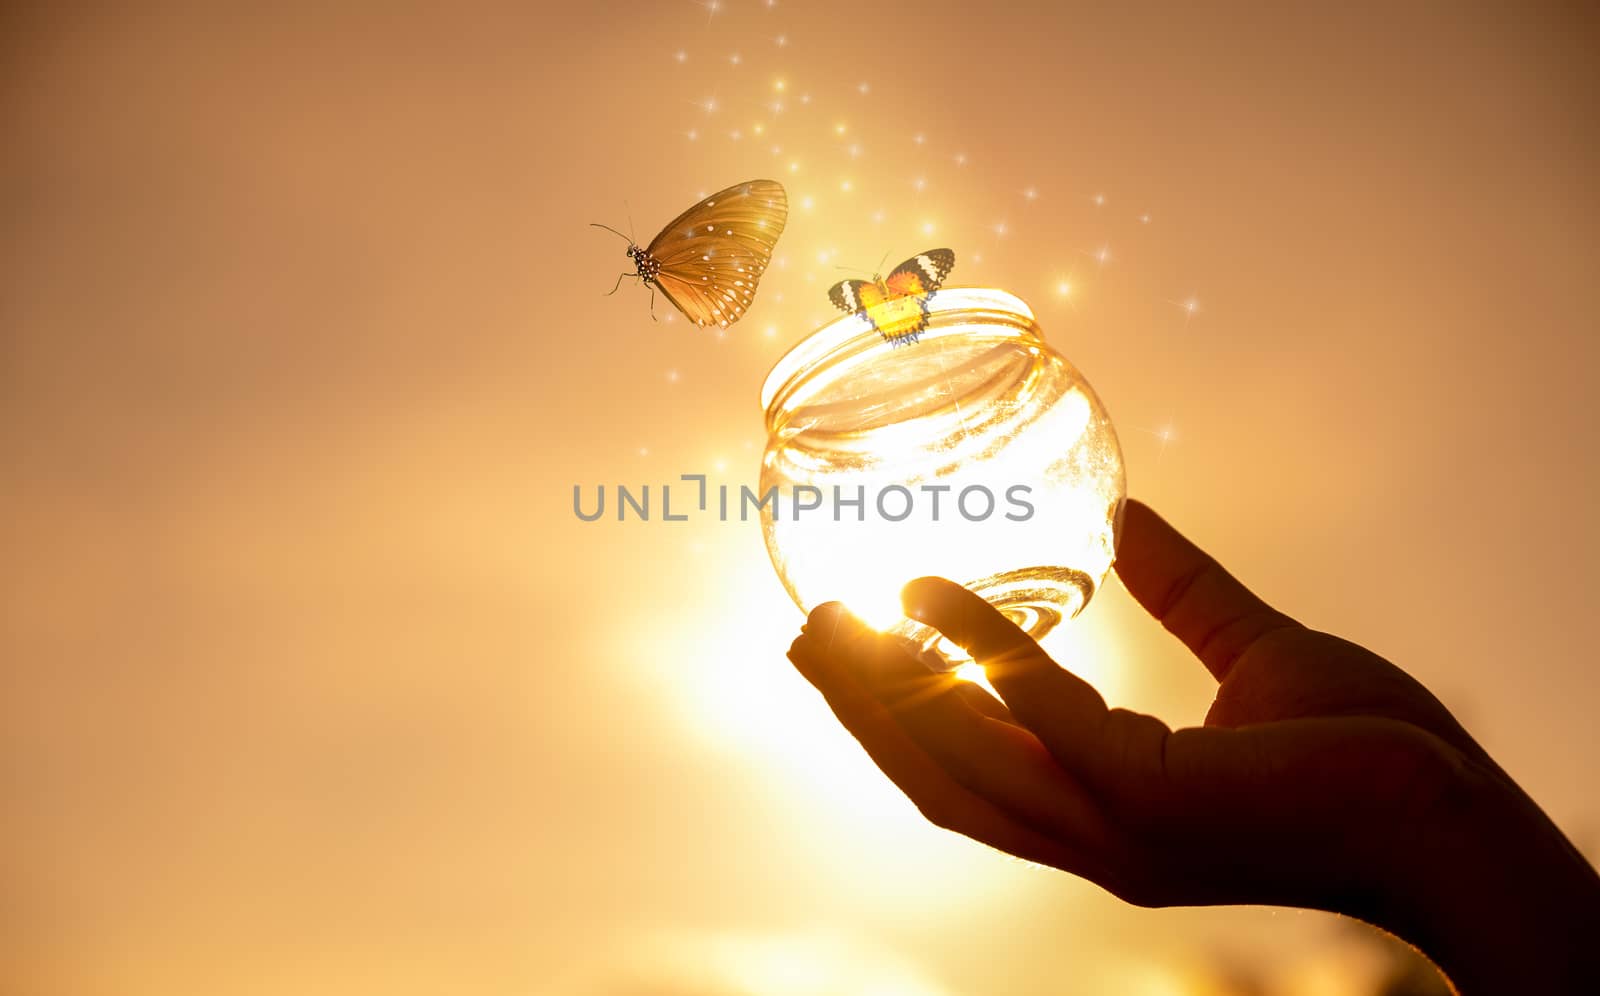 The girl frees the butterfly from the jar, golden blue moment Concept of freedom by sarayut_thaneerat